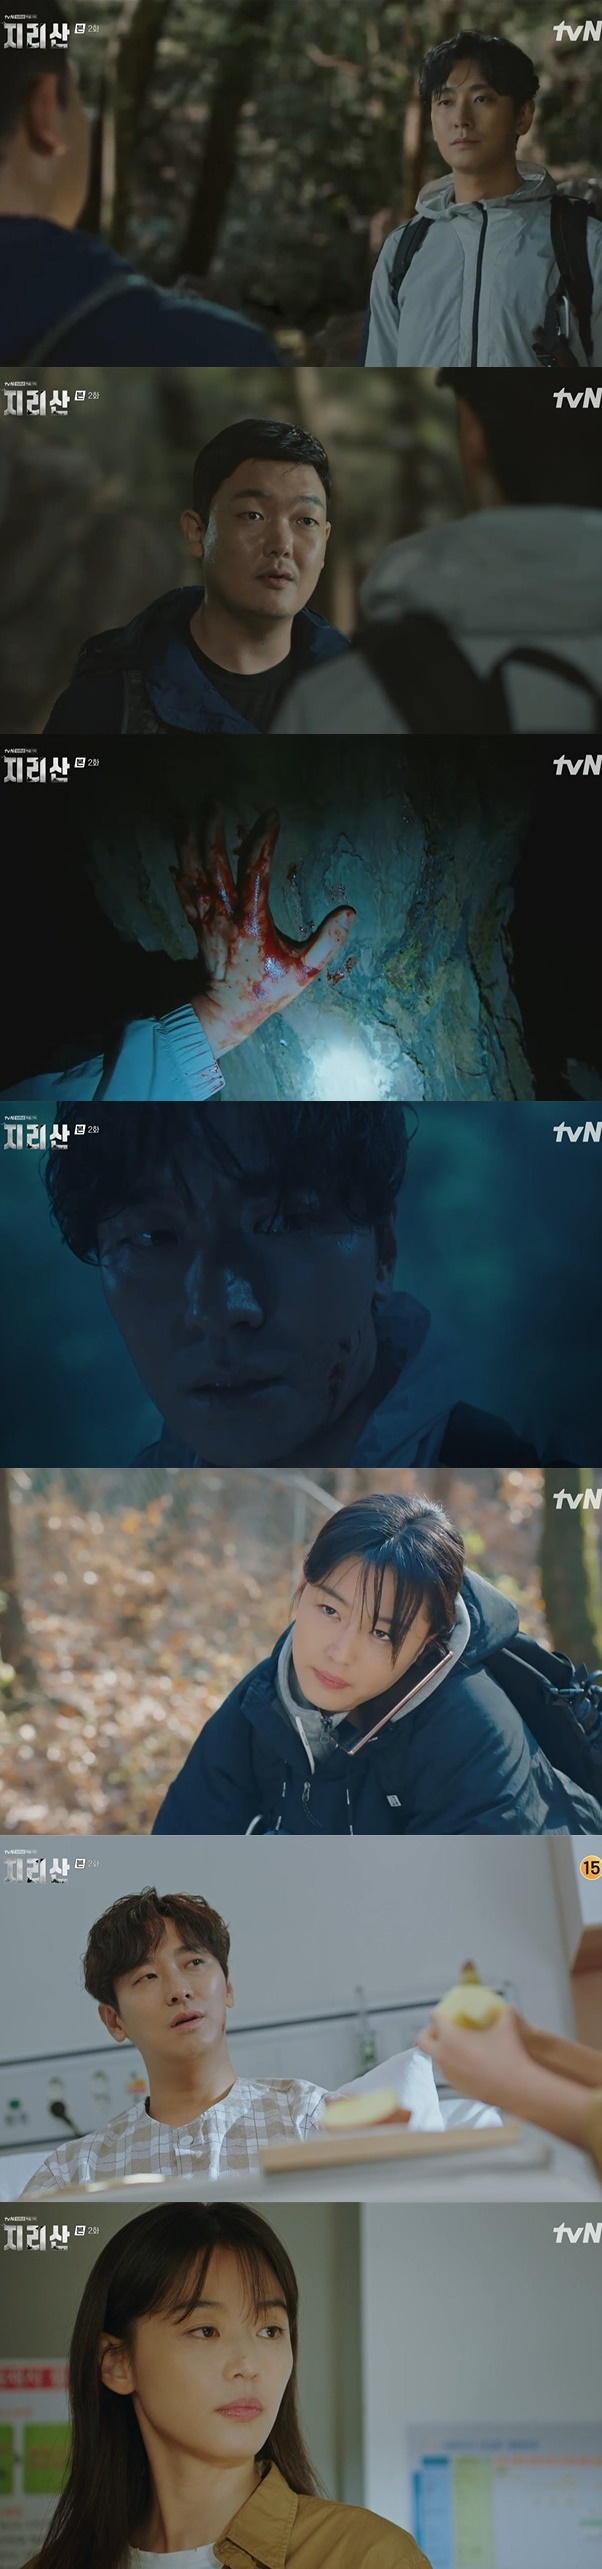 Seoul = = Jirisan Ju Ji-hoons mysterious ability and veteran Ranger Jun Ji-hyuns Confidential Assignment have solved the case once again.On the 24th night of TVNs new weekend, Drama Jirisan (played by Kim Eun-hee/directed by Lee Eung-bok) was a welcome to go hiking alone in Jirisan.While alone in the Web, he called the Sui River (Jun Ji-hyun) and asked where he saw it in the reception, saying, The Fog is not a place where yellow ribbon is tied to a lot of SONAMOO communities.gang hyun met a man in a mountain full of The Fog.When gang hyun pressed for herbal Illegal extraction, the man showed inside the bag, responding that he was looking for Ashes from his father, who went missing a year ago, not herbals.gang hyun visited the Seoi River and said, Some people have wandered the mountain for a year because they can not forget their dead father.But this steel is Have you had a drink in the town hall?When West This steel is not seen the next day, he thought he went to the scene of the incident he said earlier.I went to the police Kim Woong-soon (Jeon Seok-ho) to find out the case where gang hyun showed interest.My children are still looking for me, my son is still looking for me in the mountains, said Seo. But Kim said, I only have one daughter. Beyond the face of the embarrassed Seoi River, the face of the man whom gang hyun met was revealed in the wanted leaflet.I went to the house of the missing person and met my daughter. This steel is missing person thought I had collected SONAMOO from Jirisan.The daughter of the missing person confessed that her father did not want to, but that she had been forced to go to the mountain for money.The man who took the missing person to the mountain was a man who lied to Kim ki chang. gang hyun as the son of the missing person.gang hyun found out his identity by kim ki change and Caught in the Web.I found Kim Ki Changs wallet and bag on the cliff, and found contradiction in Kim Ki Changs statement about missing persons.The embattled Kim ki change stabbed the gang hyun with the knife he had, saying, Its not suicide, I pushed.He was bleeding and wandering through the mountains, and when he put his bloody hand on the tree, he knew that his vision was his future.gang hyun left a mark on the spot with a tree.This steel is bleeding and rescued the fallen gang hyun, and the mark was followed by Kim Ki change and succeeded in arrest.After the case was finished, he met with this steel is gang hyun and talked about the vision he saw.It was the Seoi River that came to understand the mysterious secret of the gang hyun through two events together.Based on the hints found by this steel is gang hyun, we found Ashes of missing persons in the forest.He did his best with the wine and incense he brought.Drama returned two years later to his present point: he asked West This steel is Ranger Idawon (Go Min-si) to leave a mark in the mountains.He remembered talking with gang hyun about the yellow string marks on the mountain, and then the look on the Sui River, which had found the bloodied yellow strings in the office, darkened.Then, the mountain ended with an ending featuring a mysterious person who turned over a cape in front of the Idawon, which was the Mt.